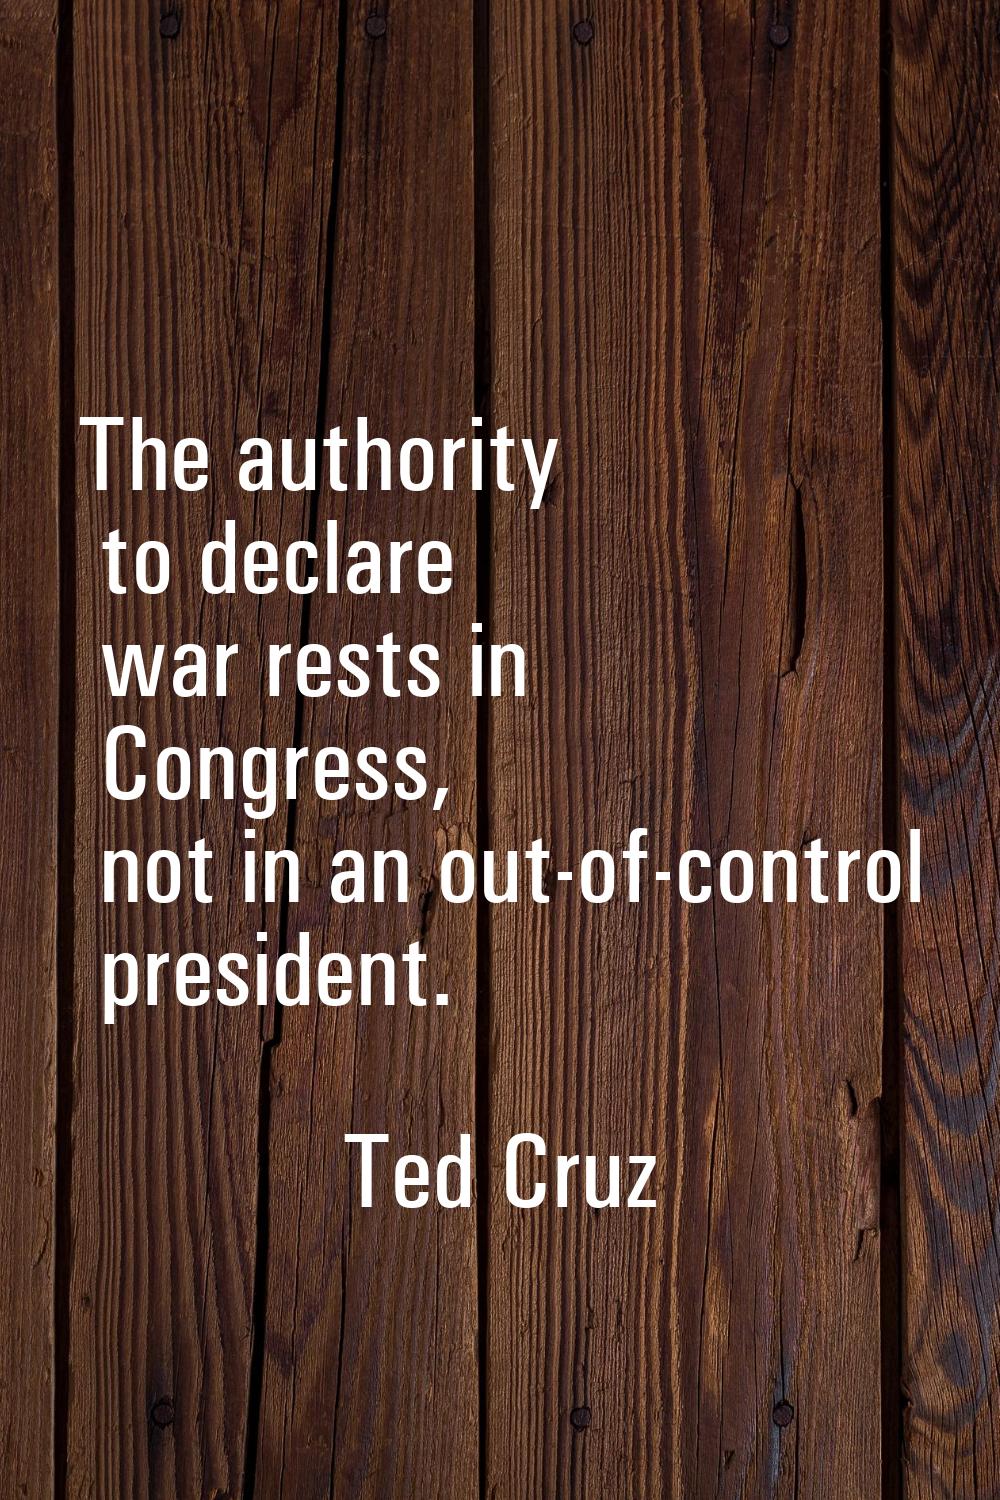 The authority to declare war rests in Congress, not in an out-of-control president.